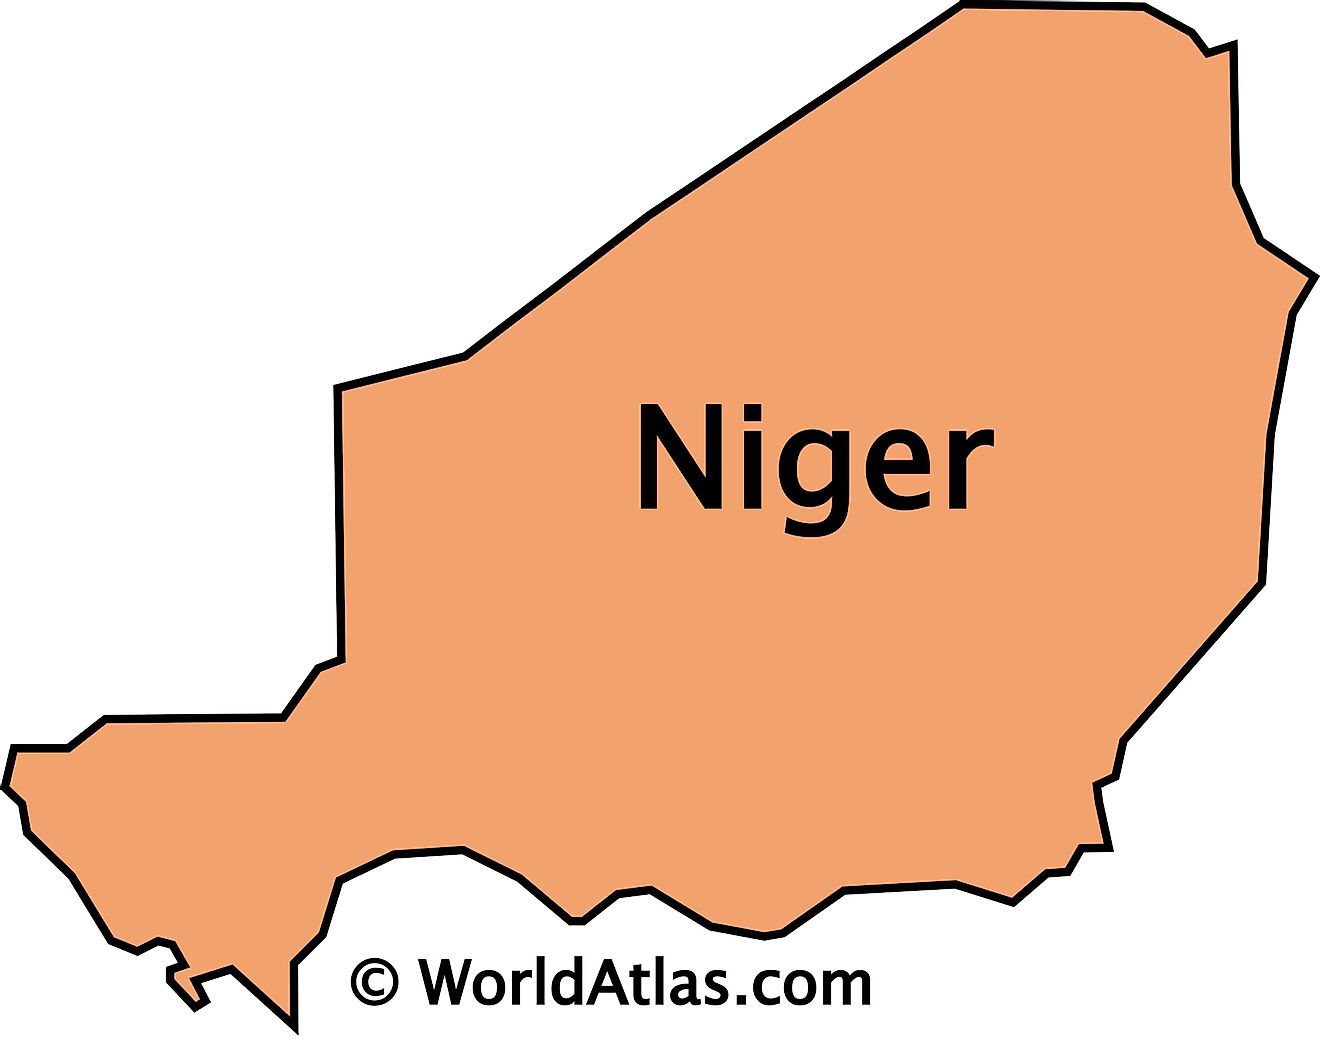 The Outline Map of Niger